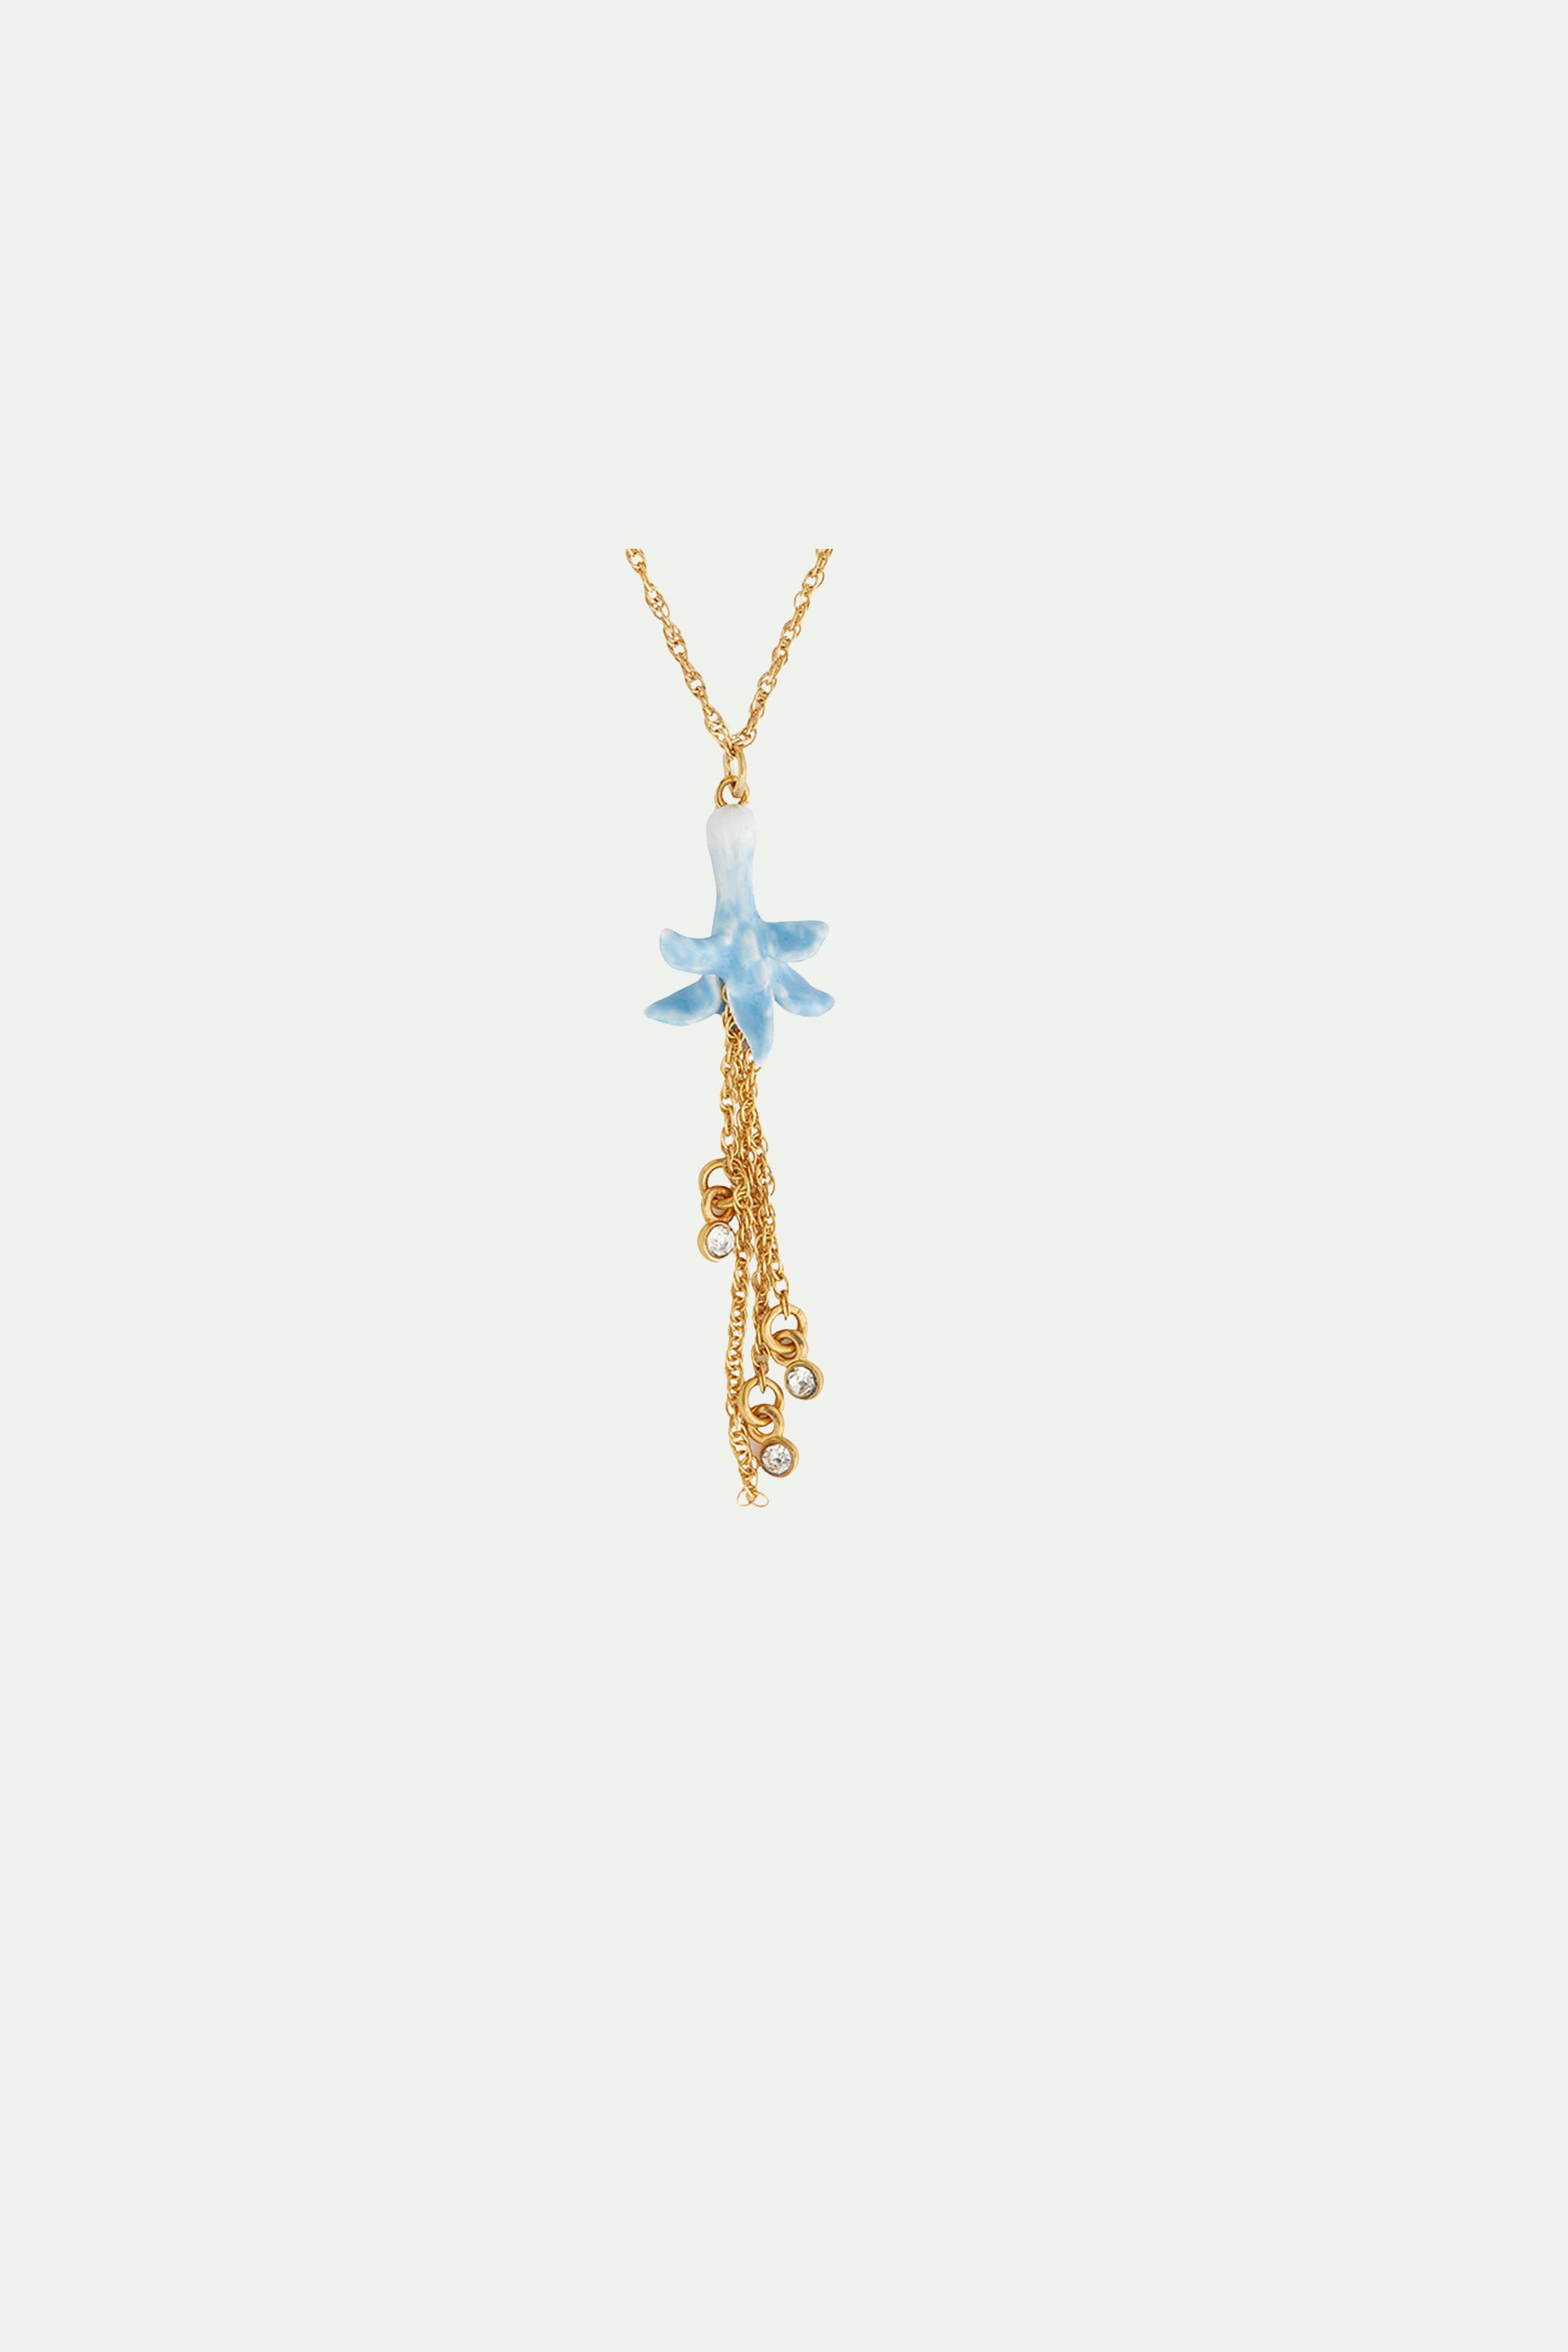 White, gold and blue flower pendant necklace